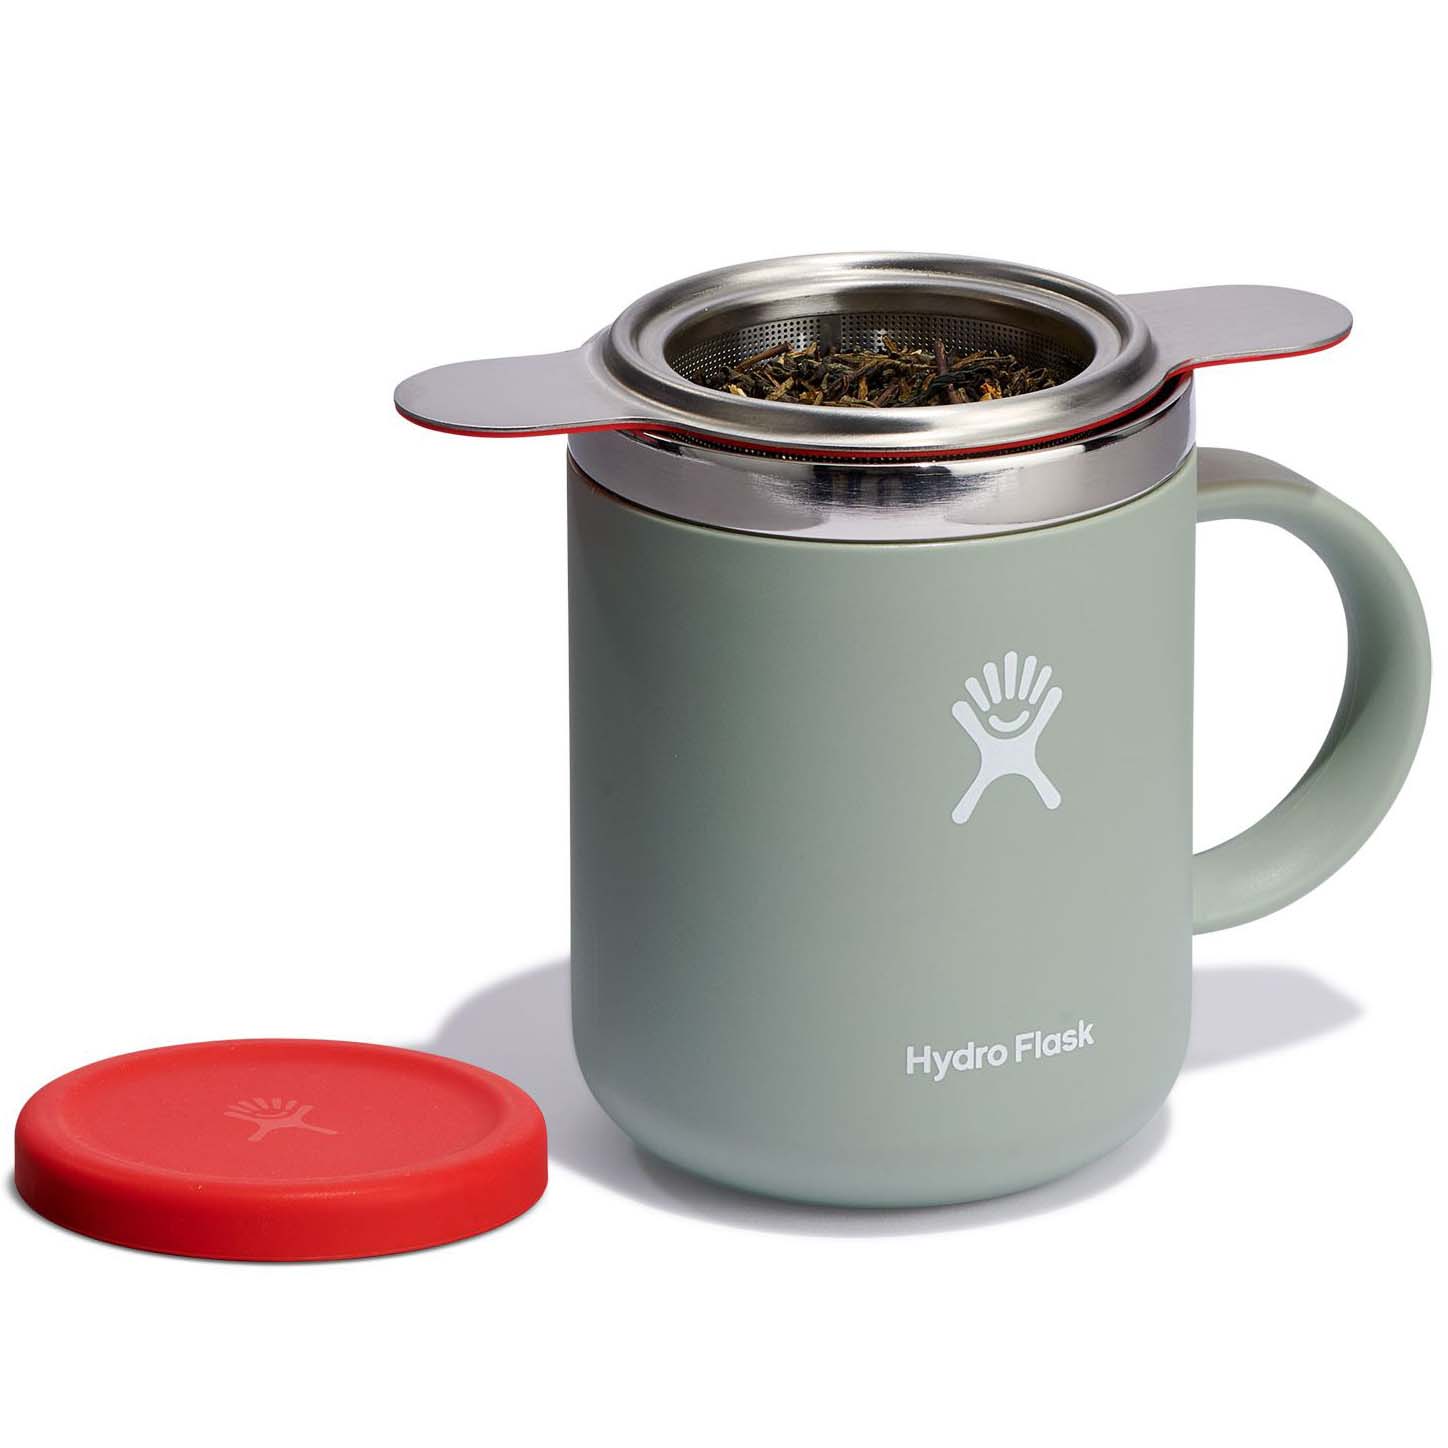 Hydro Flask Tea Infuser Camping Accessory